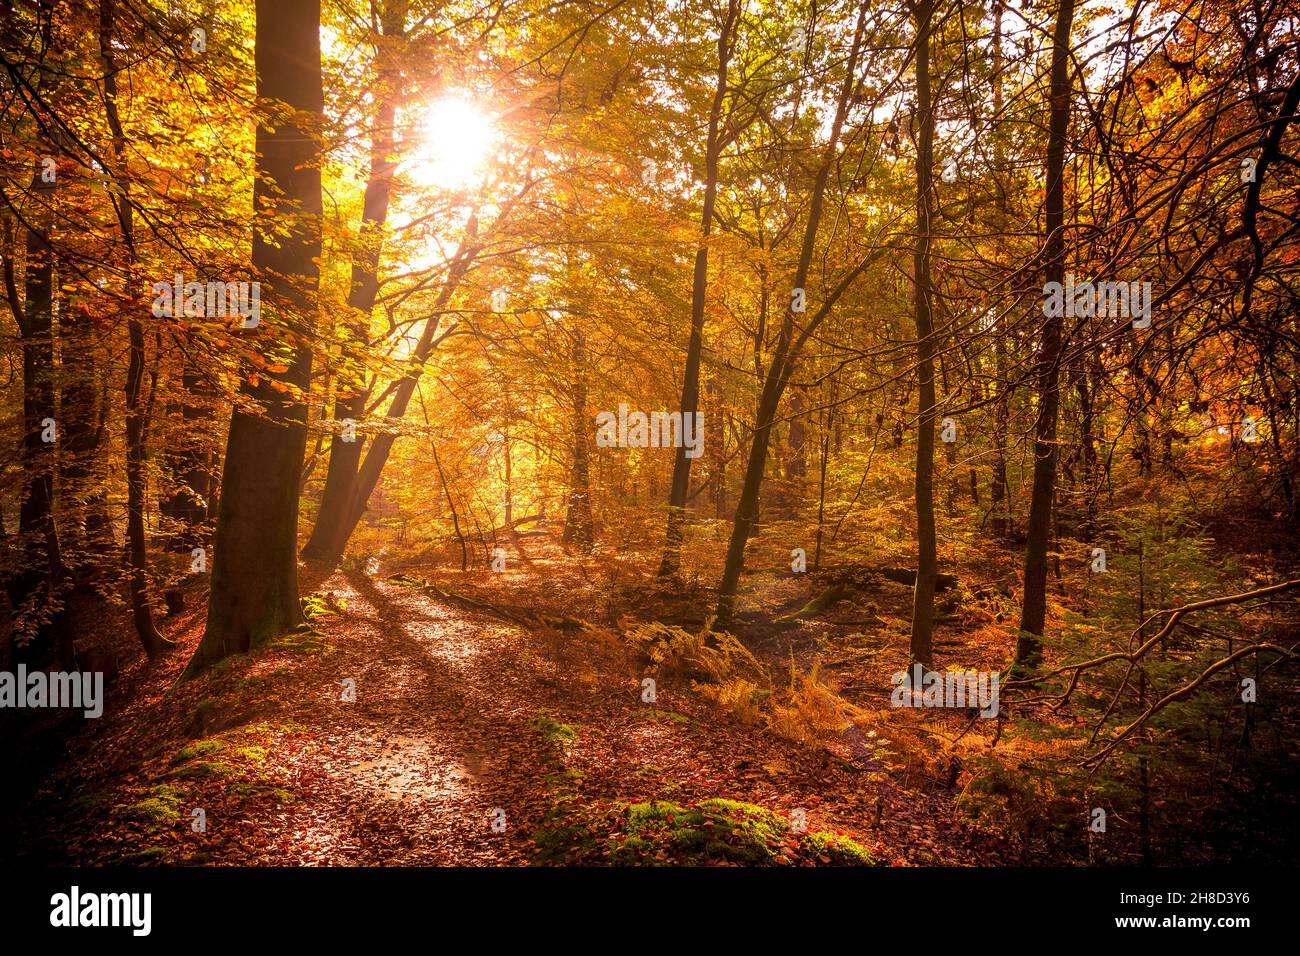 Sunlight shining through the trees in a forest with fallen leaves on a path during Autumn. Stock Photo